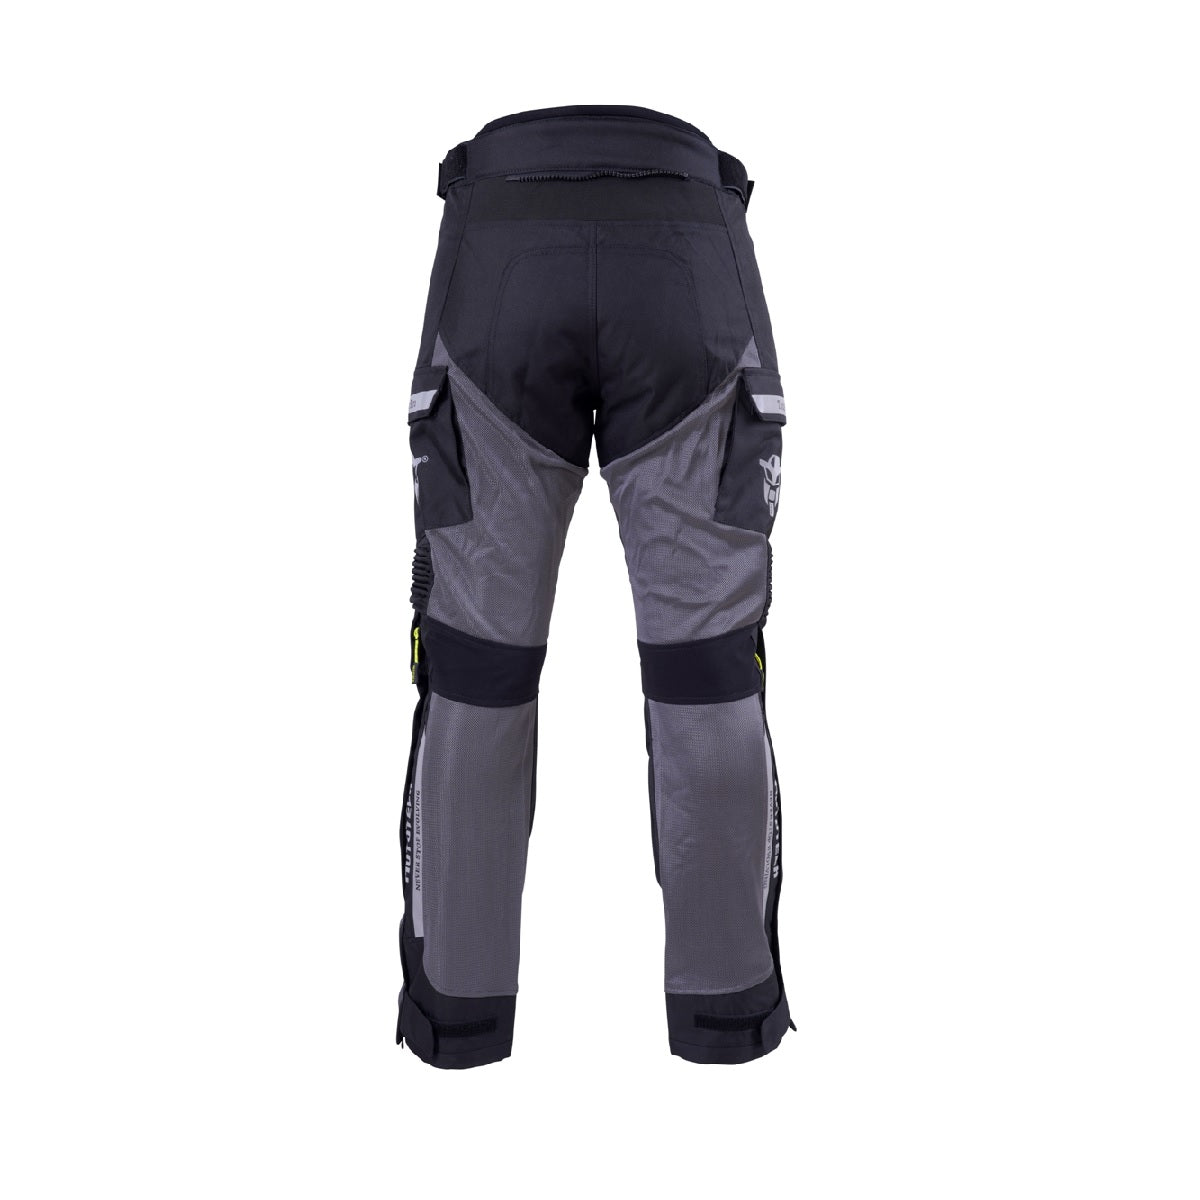 Oxford Arizona 10 Air Summer Motorcycle Trousers Mesh Scooter Pants Black  White  eBay